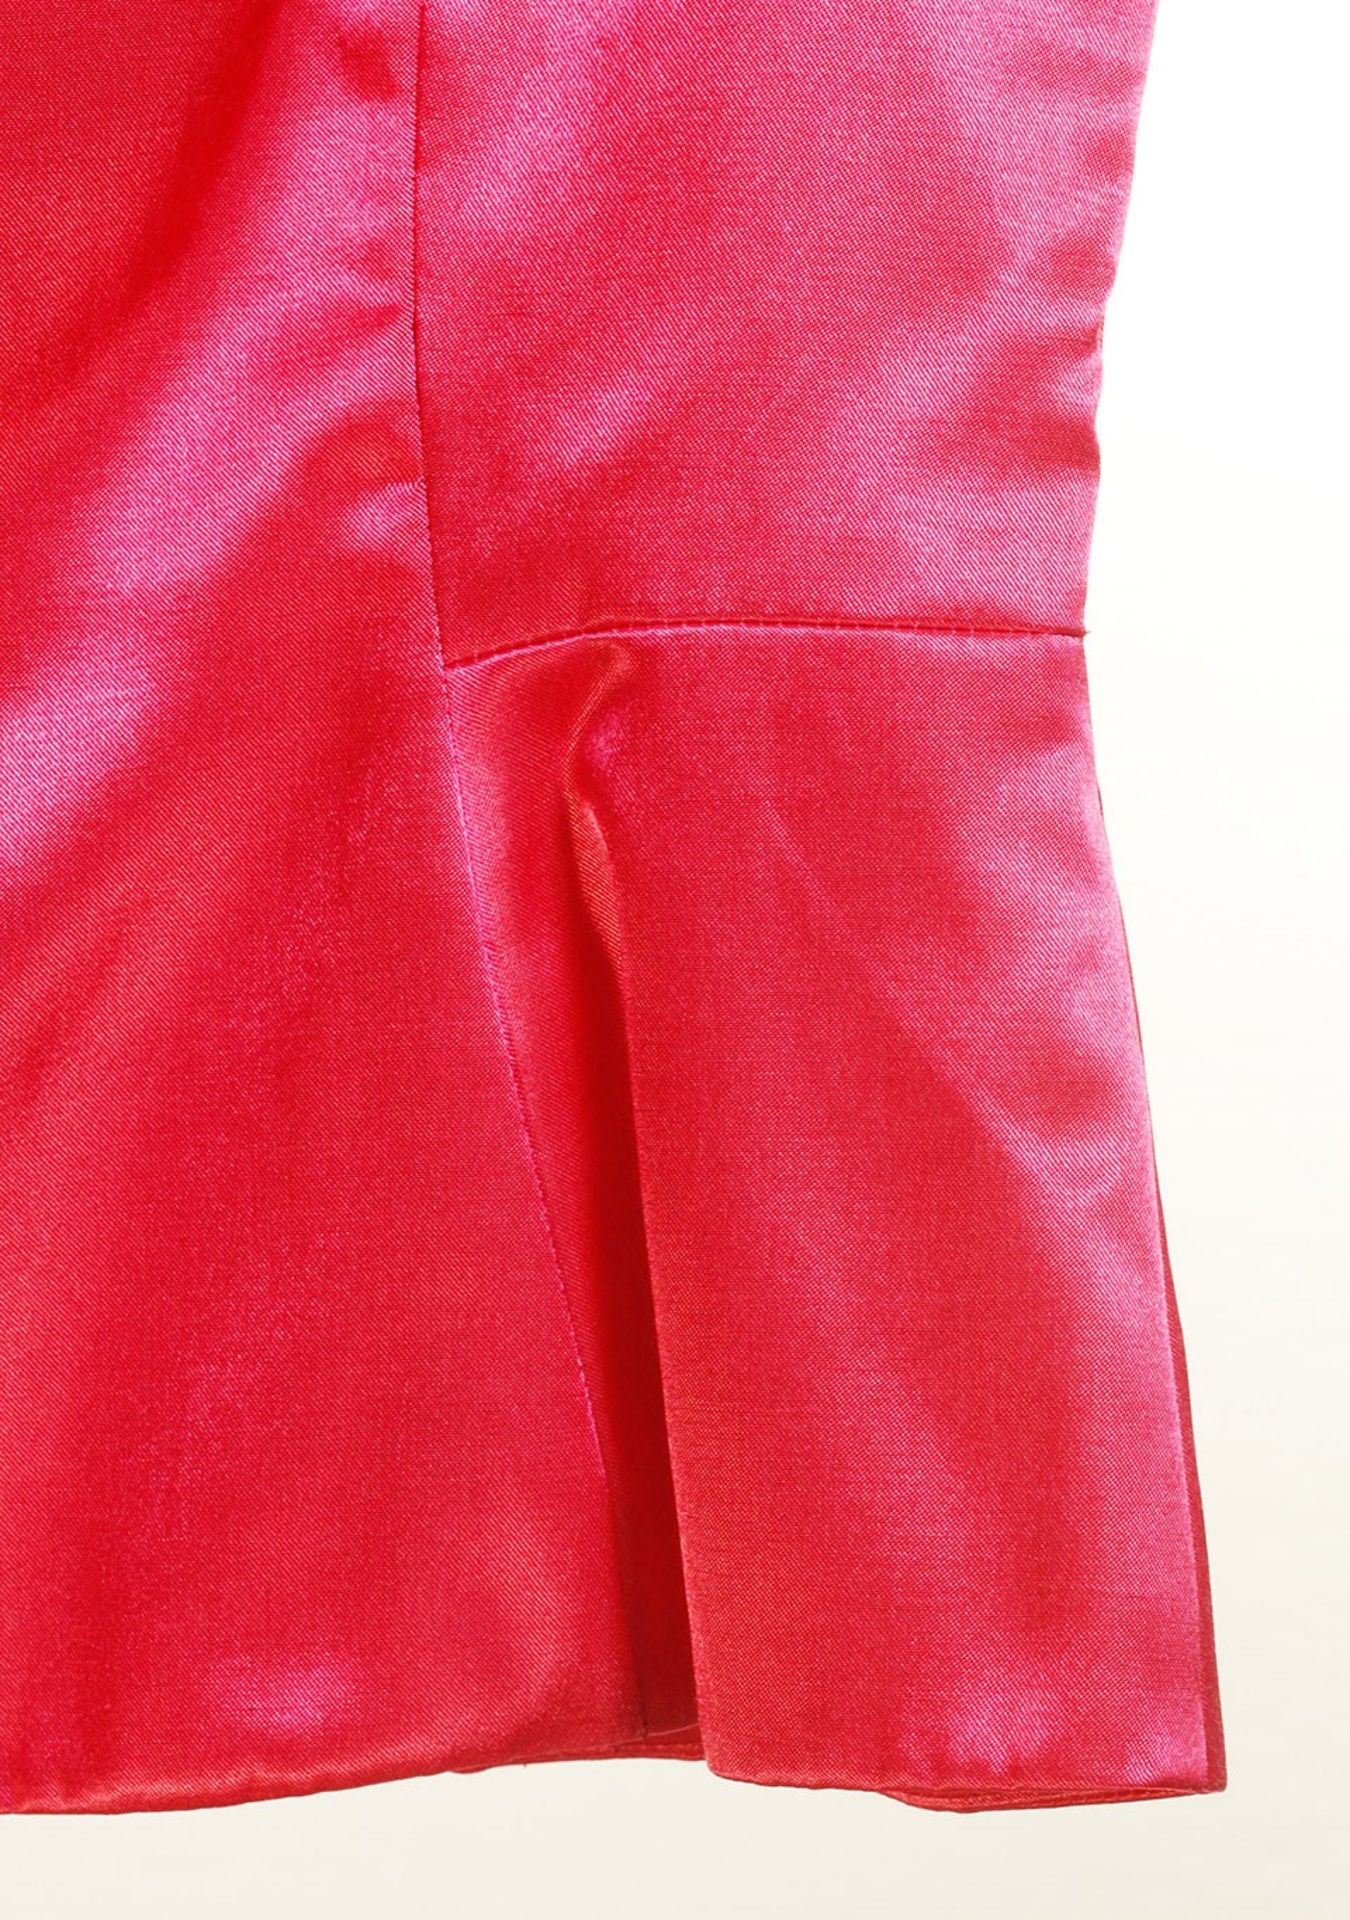 1 x Boutique Le Duc Fuschia Vest - From a High End Clothing Boutique In The - Image 4 of 10